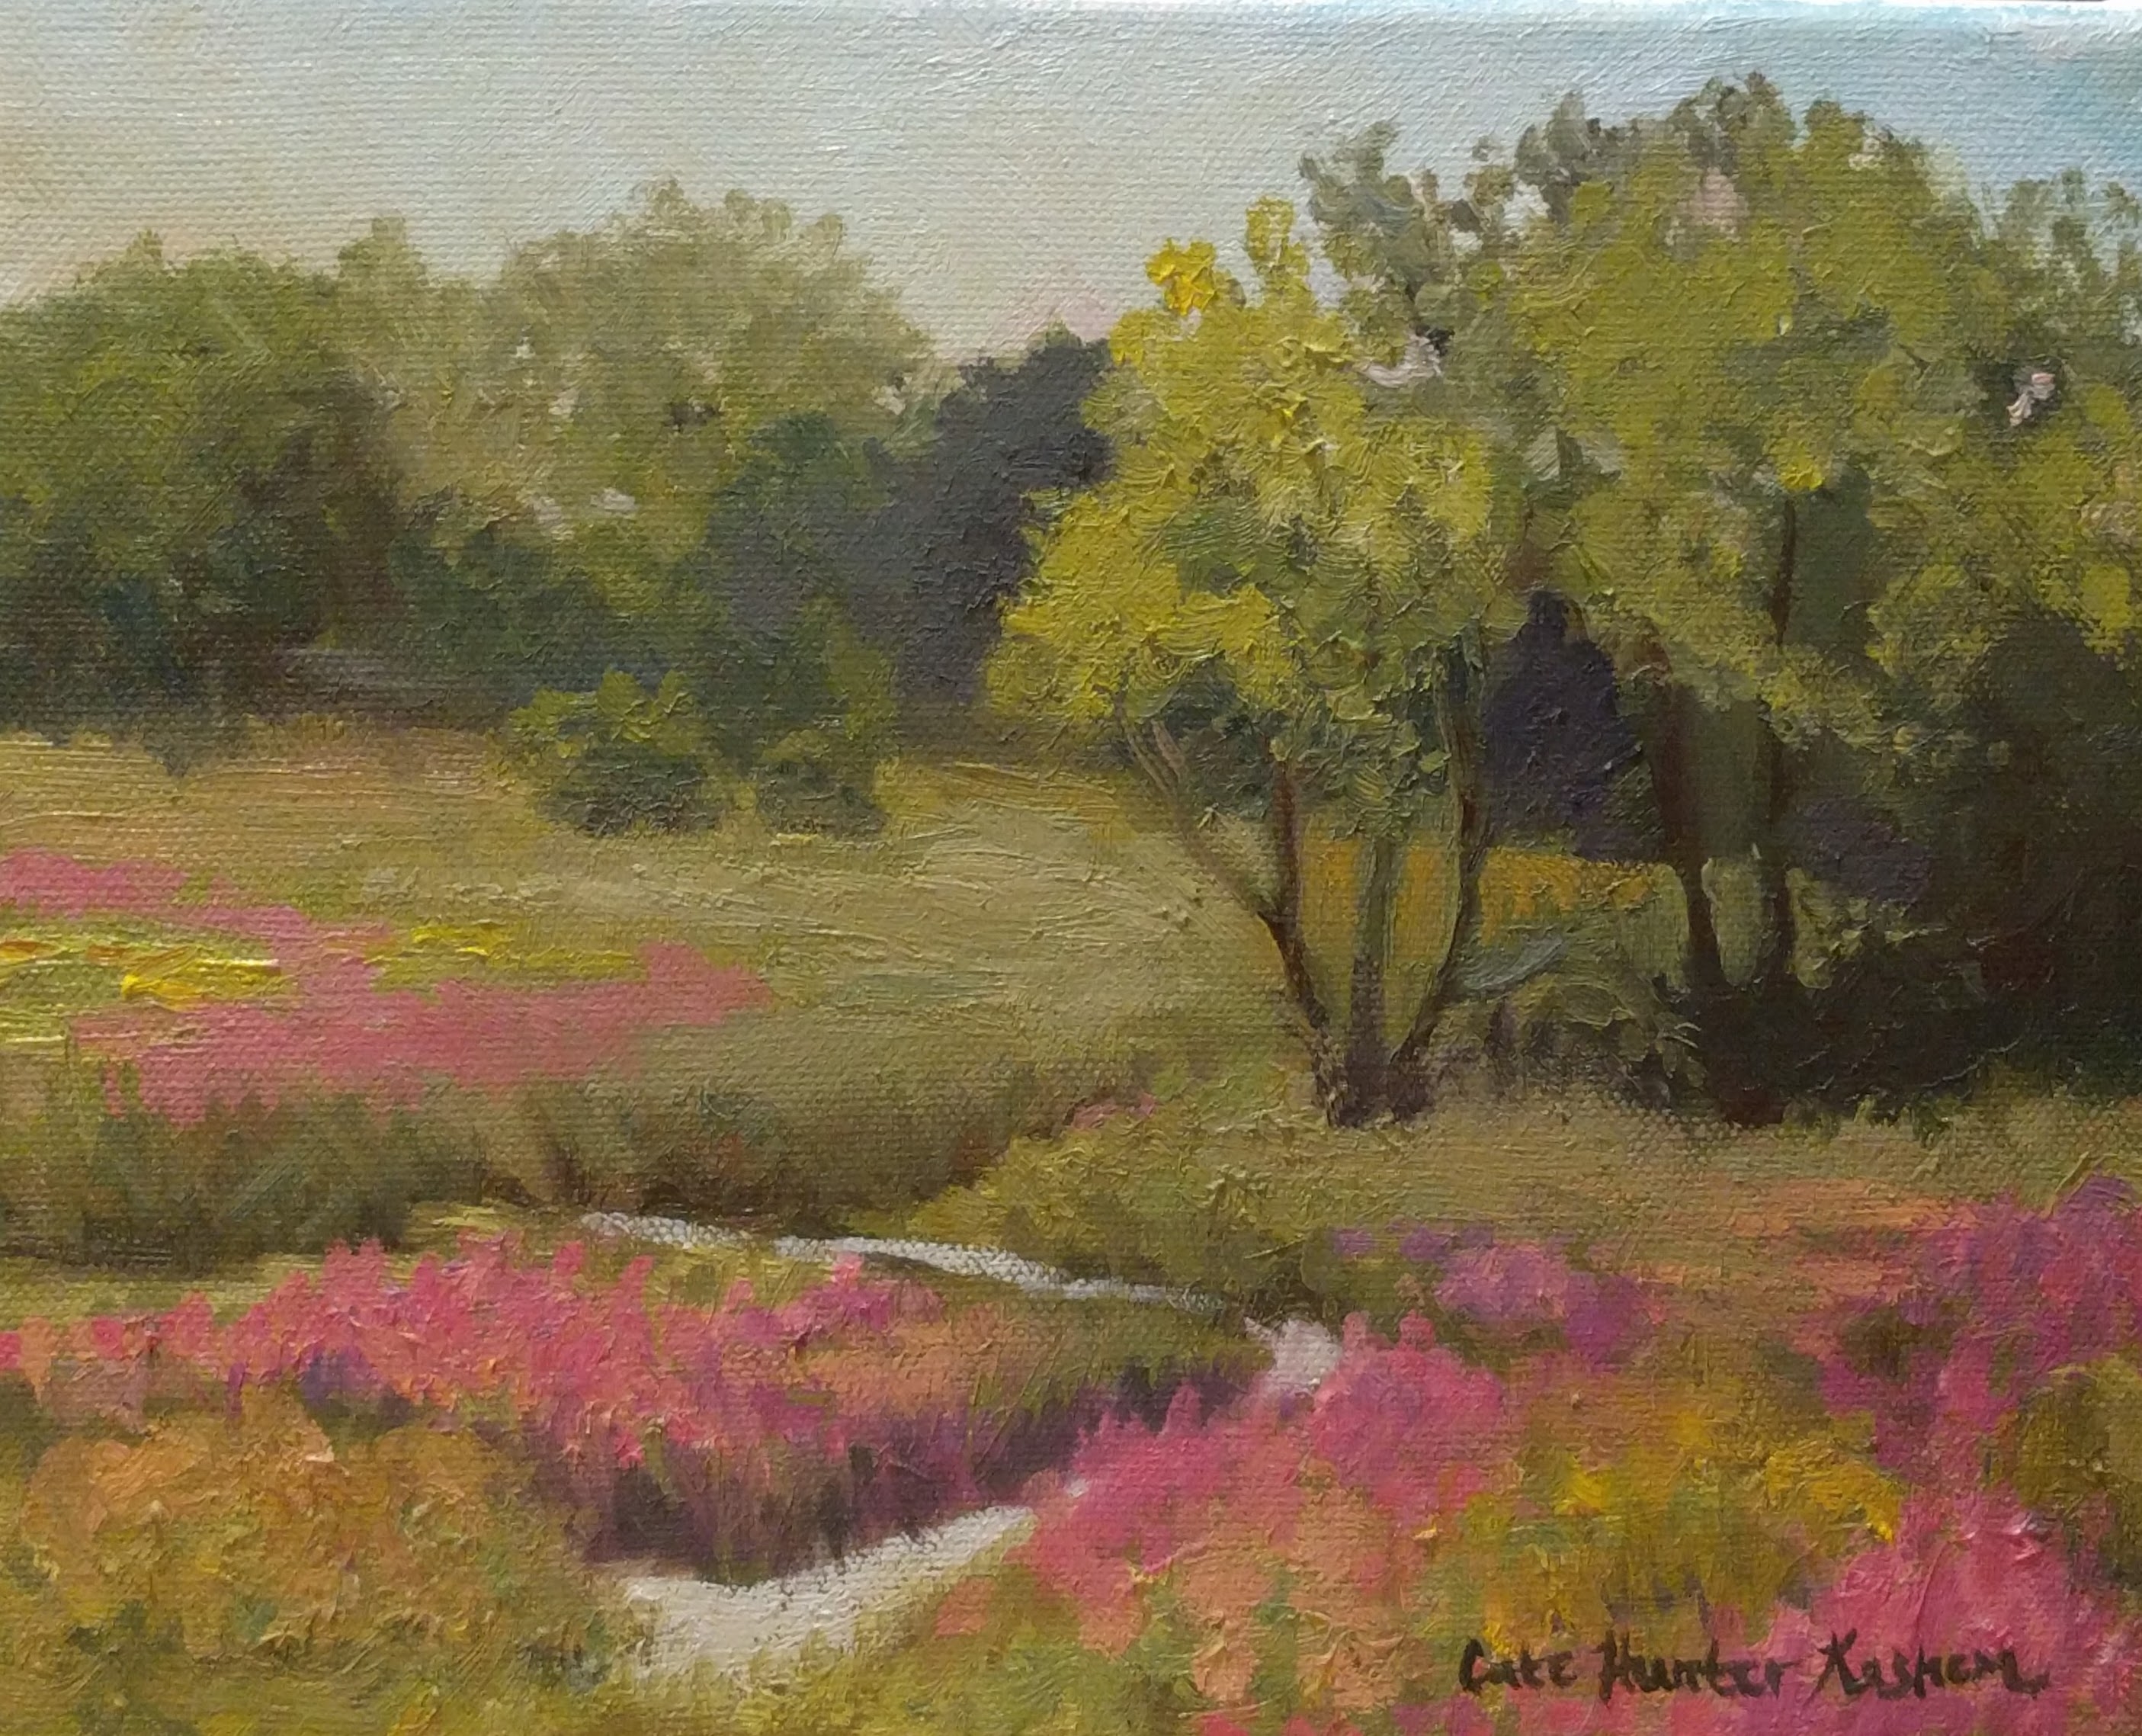 Painting of a stream in a field